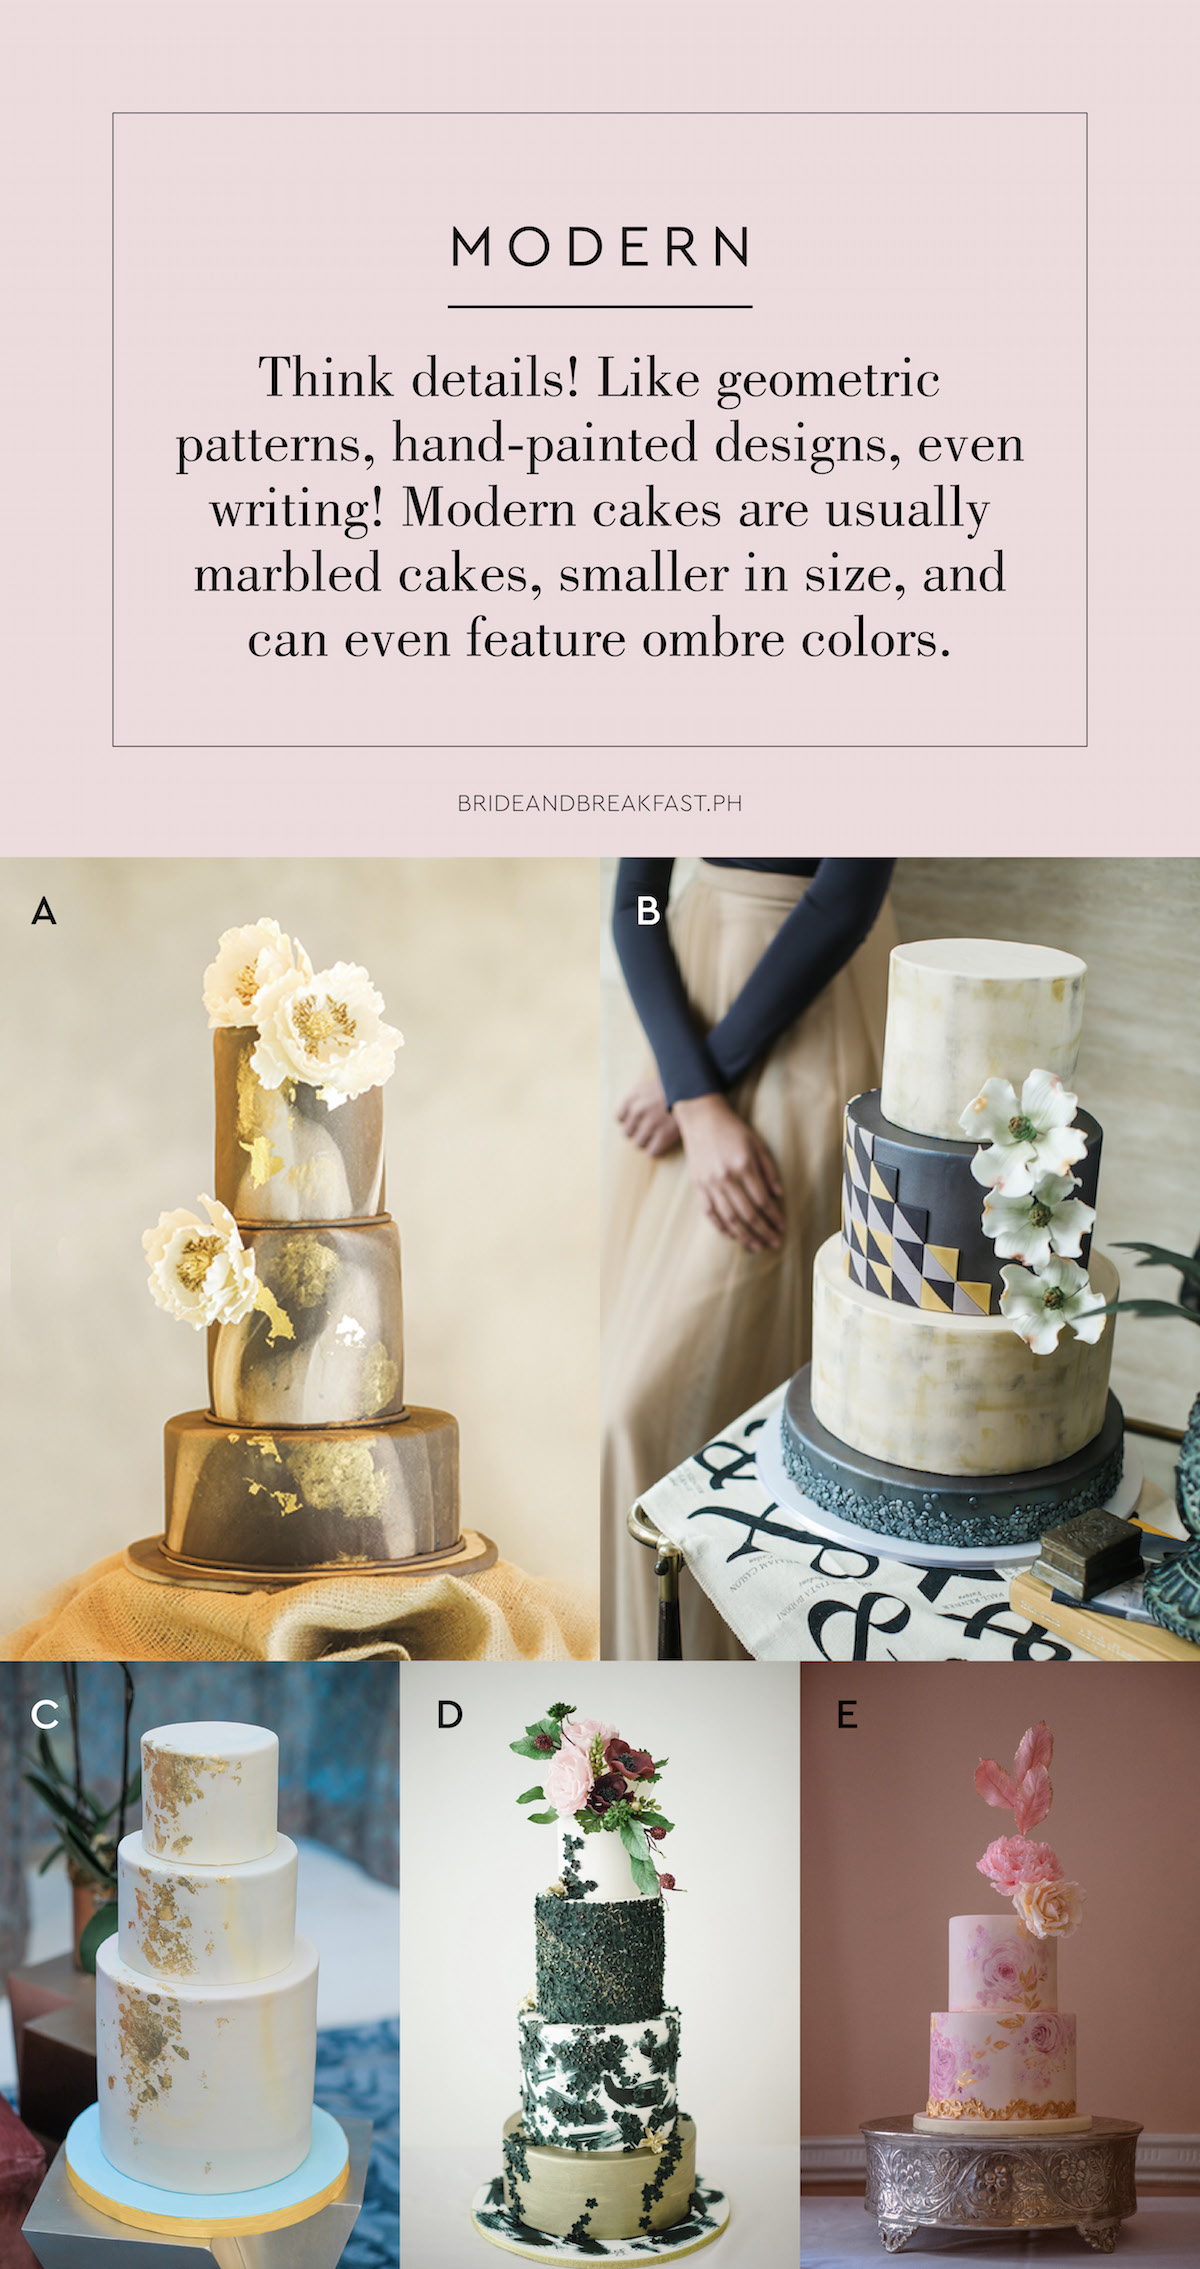 MODERN Think details! Like geometric patterns, hand-painted designs, even writing! Modern cakes are usually marbled cakes, smaller in size, and can even feature ombre colors.